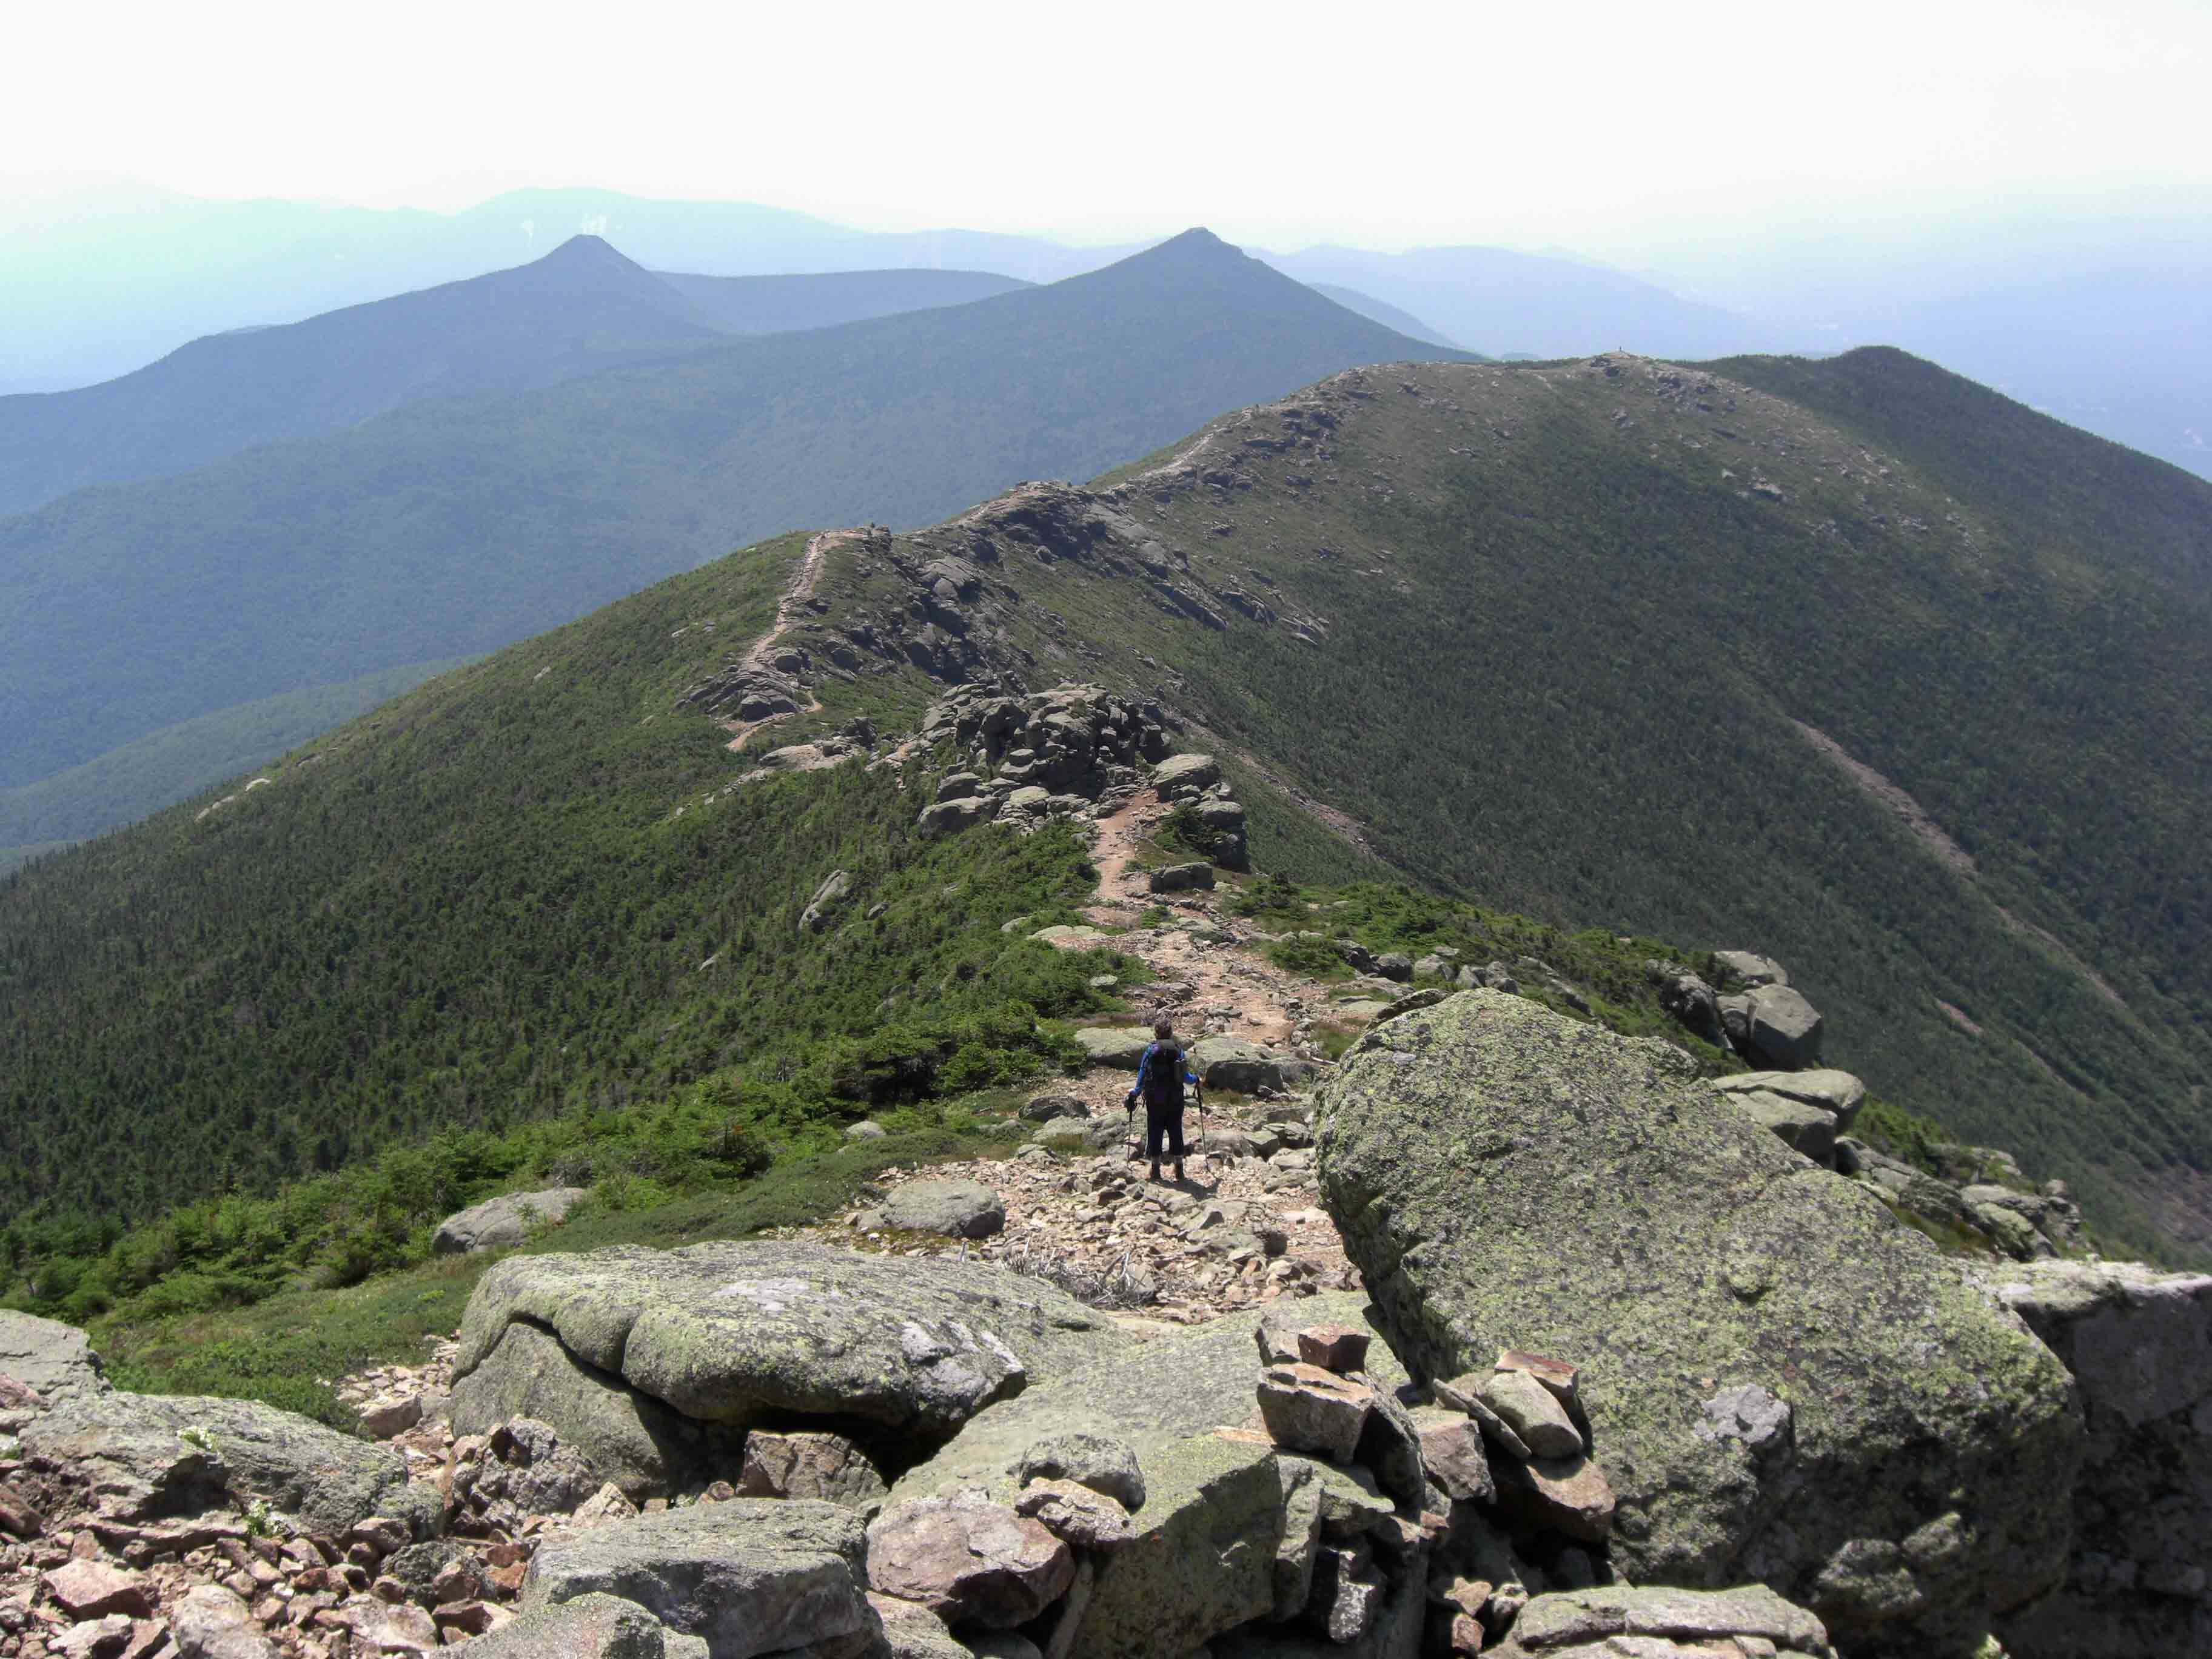 mm 22.3 - View south from Mt. Lincoln along Franconia Ridge towards Little Haystack. Mt Flume and Mt. Liberty in distance.  Courtesy seqatt.net@sbcglobal.net